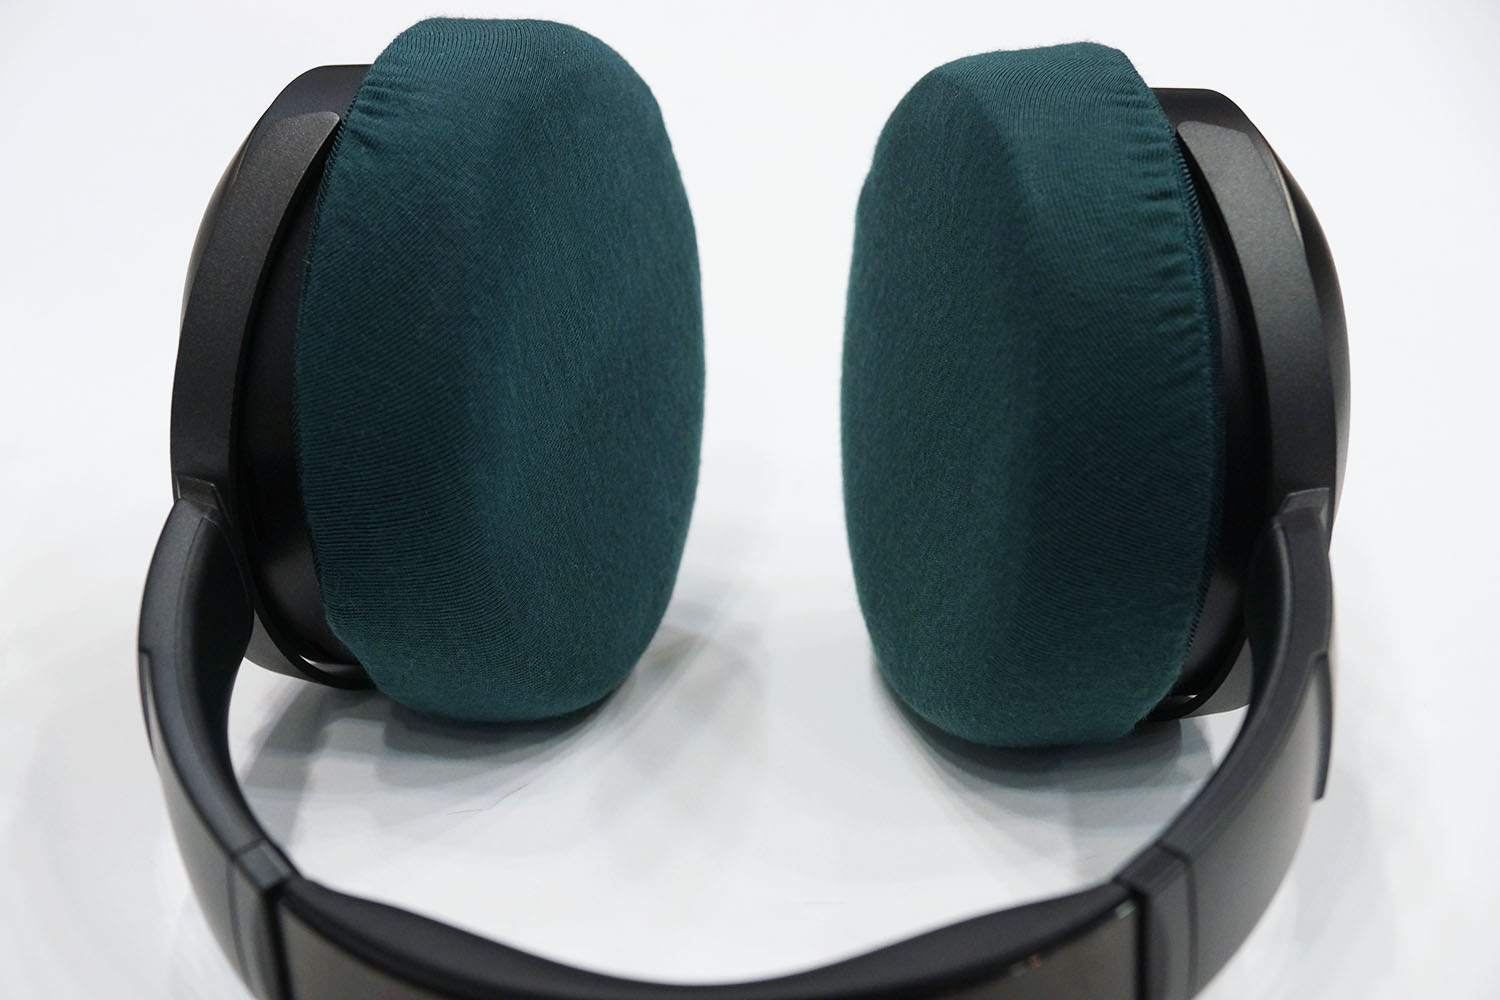 VECLOS HPT-700 earpad repair and protection: Super Stretch 